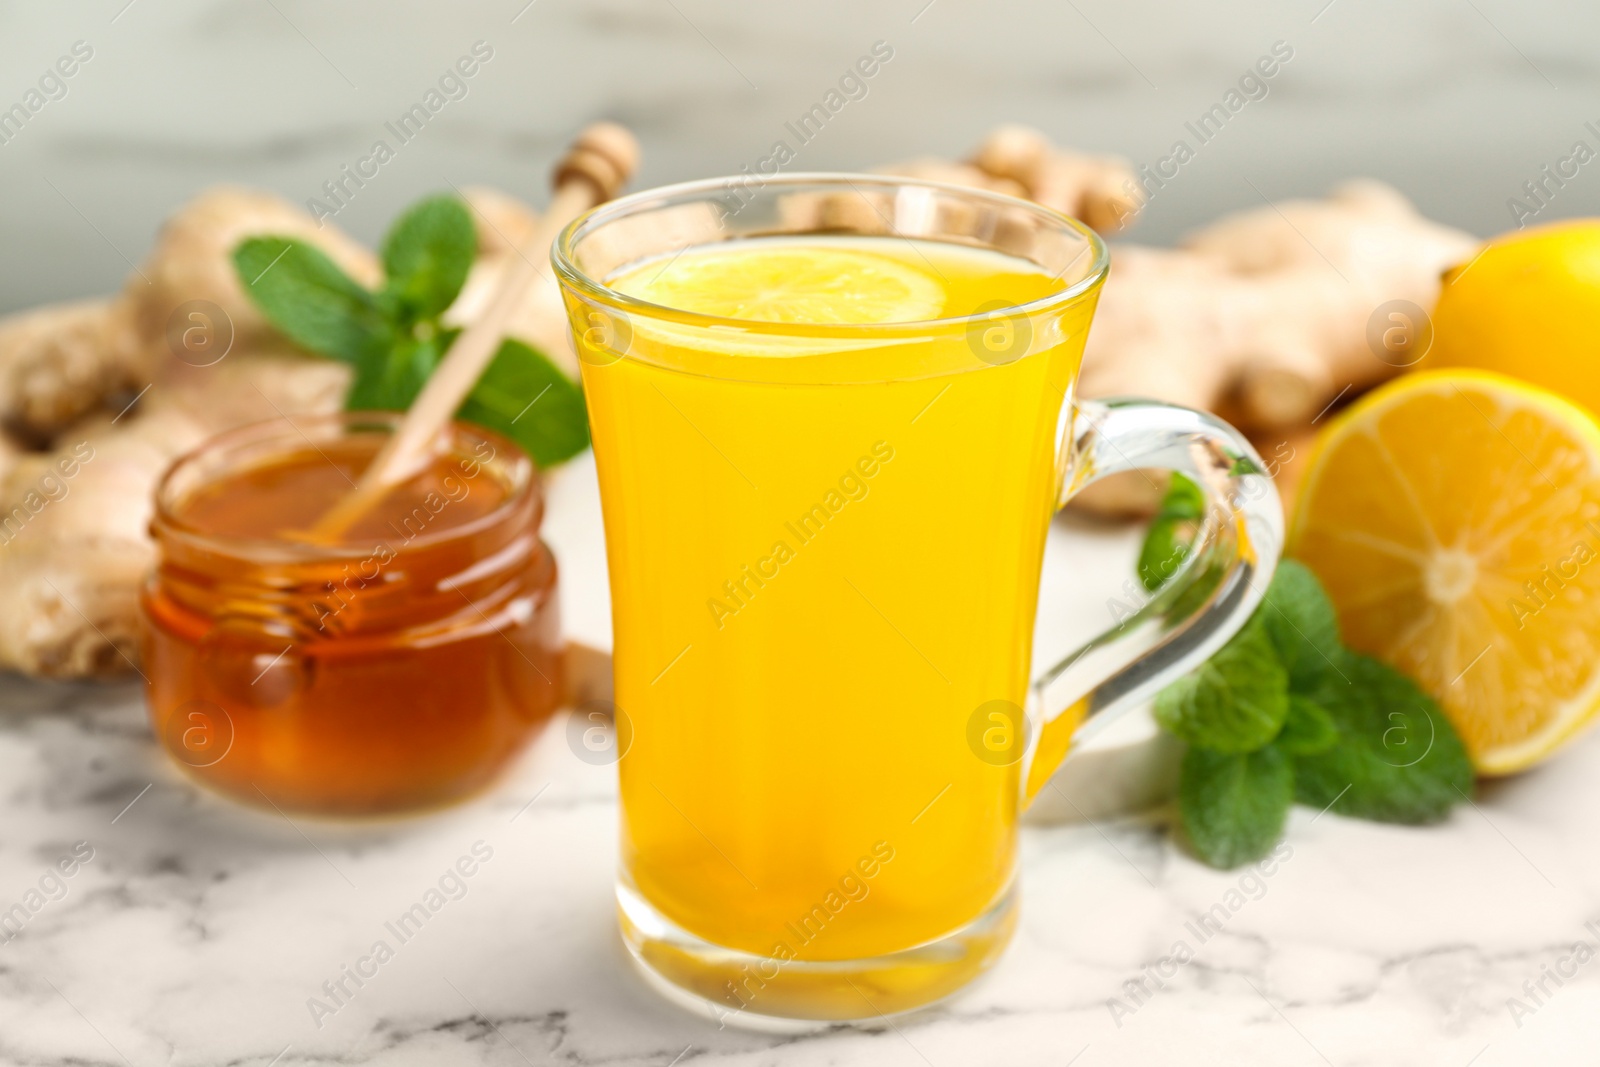 Photo of Immunity boosting drink and ingredients on white marble table, closeup